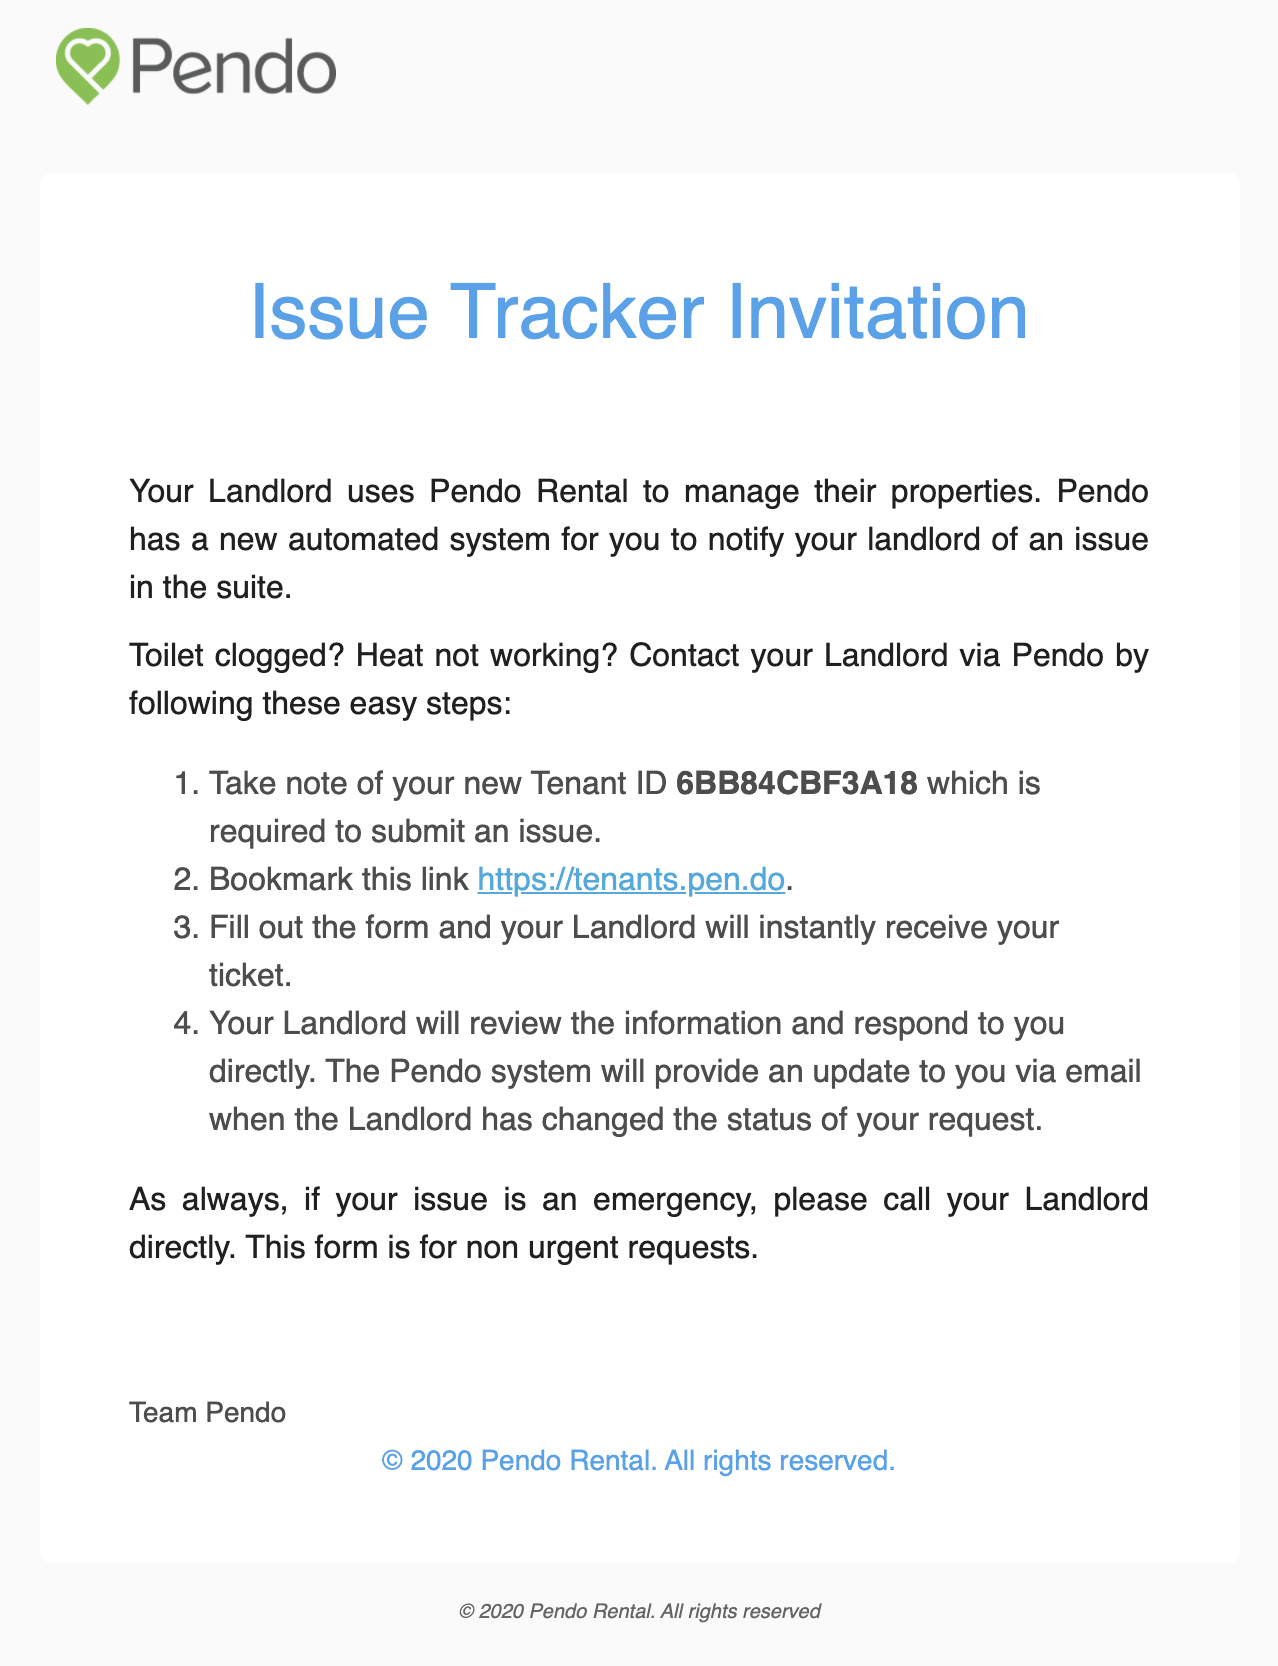 What does the tenant invitation for the Issue Tracker look like? – The